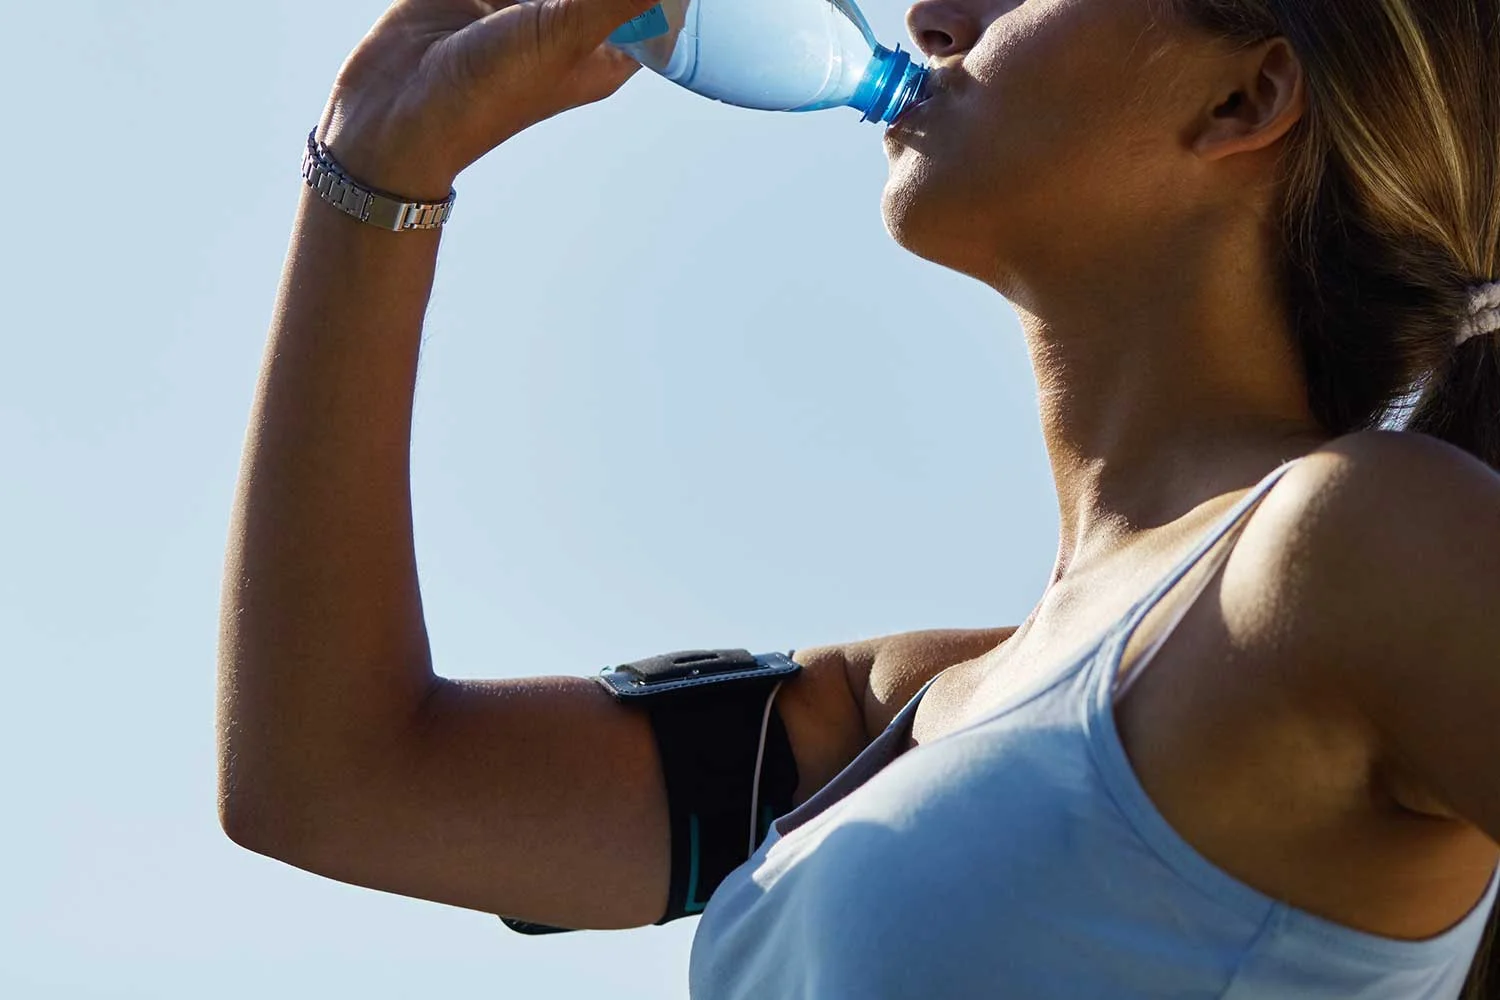 Sporty young woman drinking water from a bottle after training outdoors on a sunny day